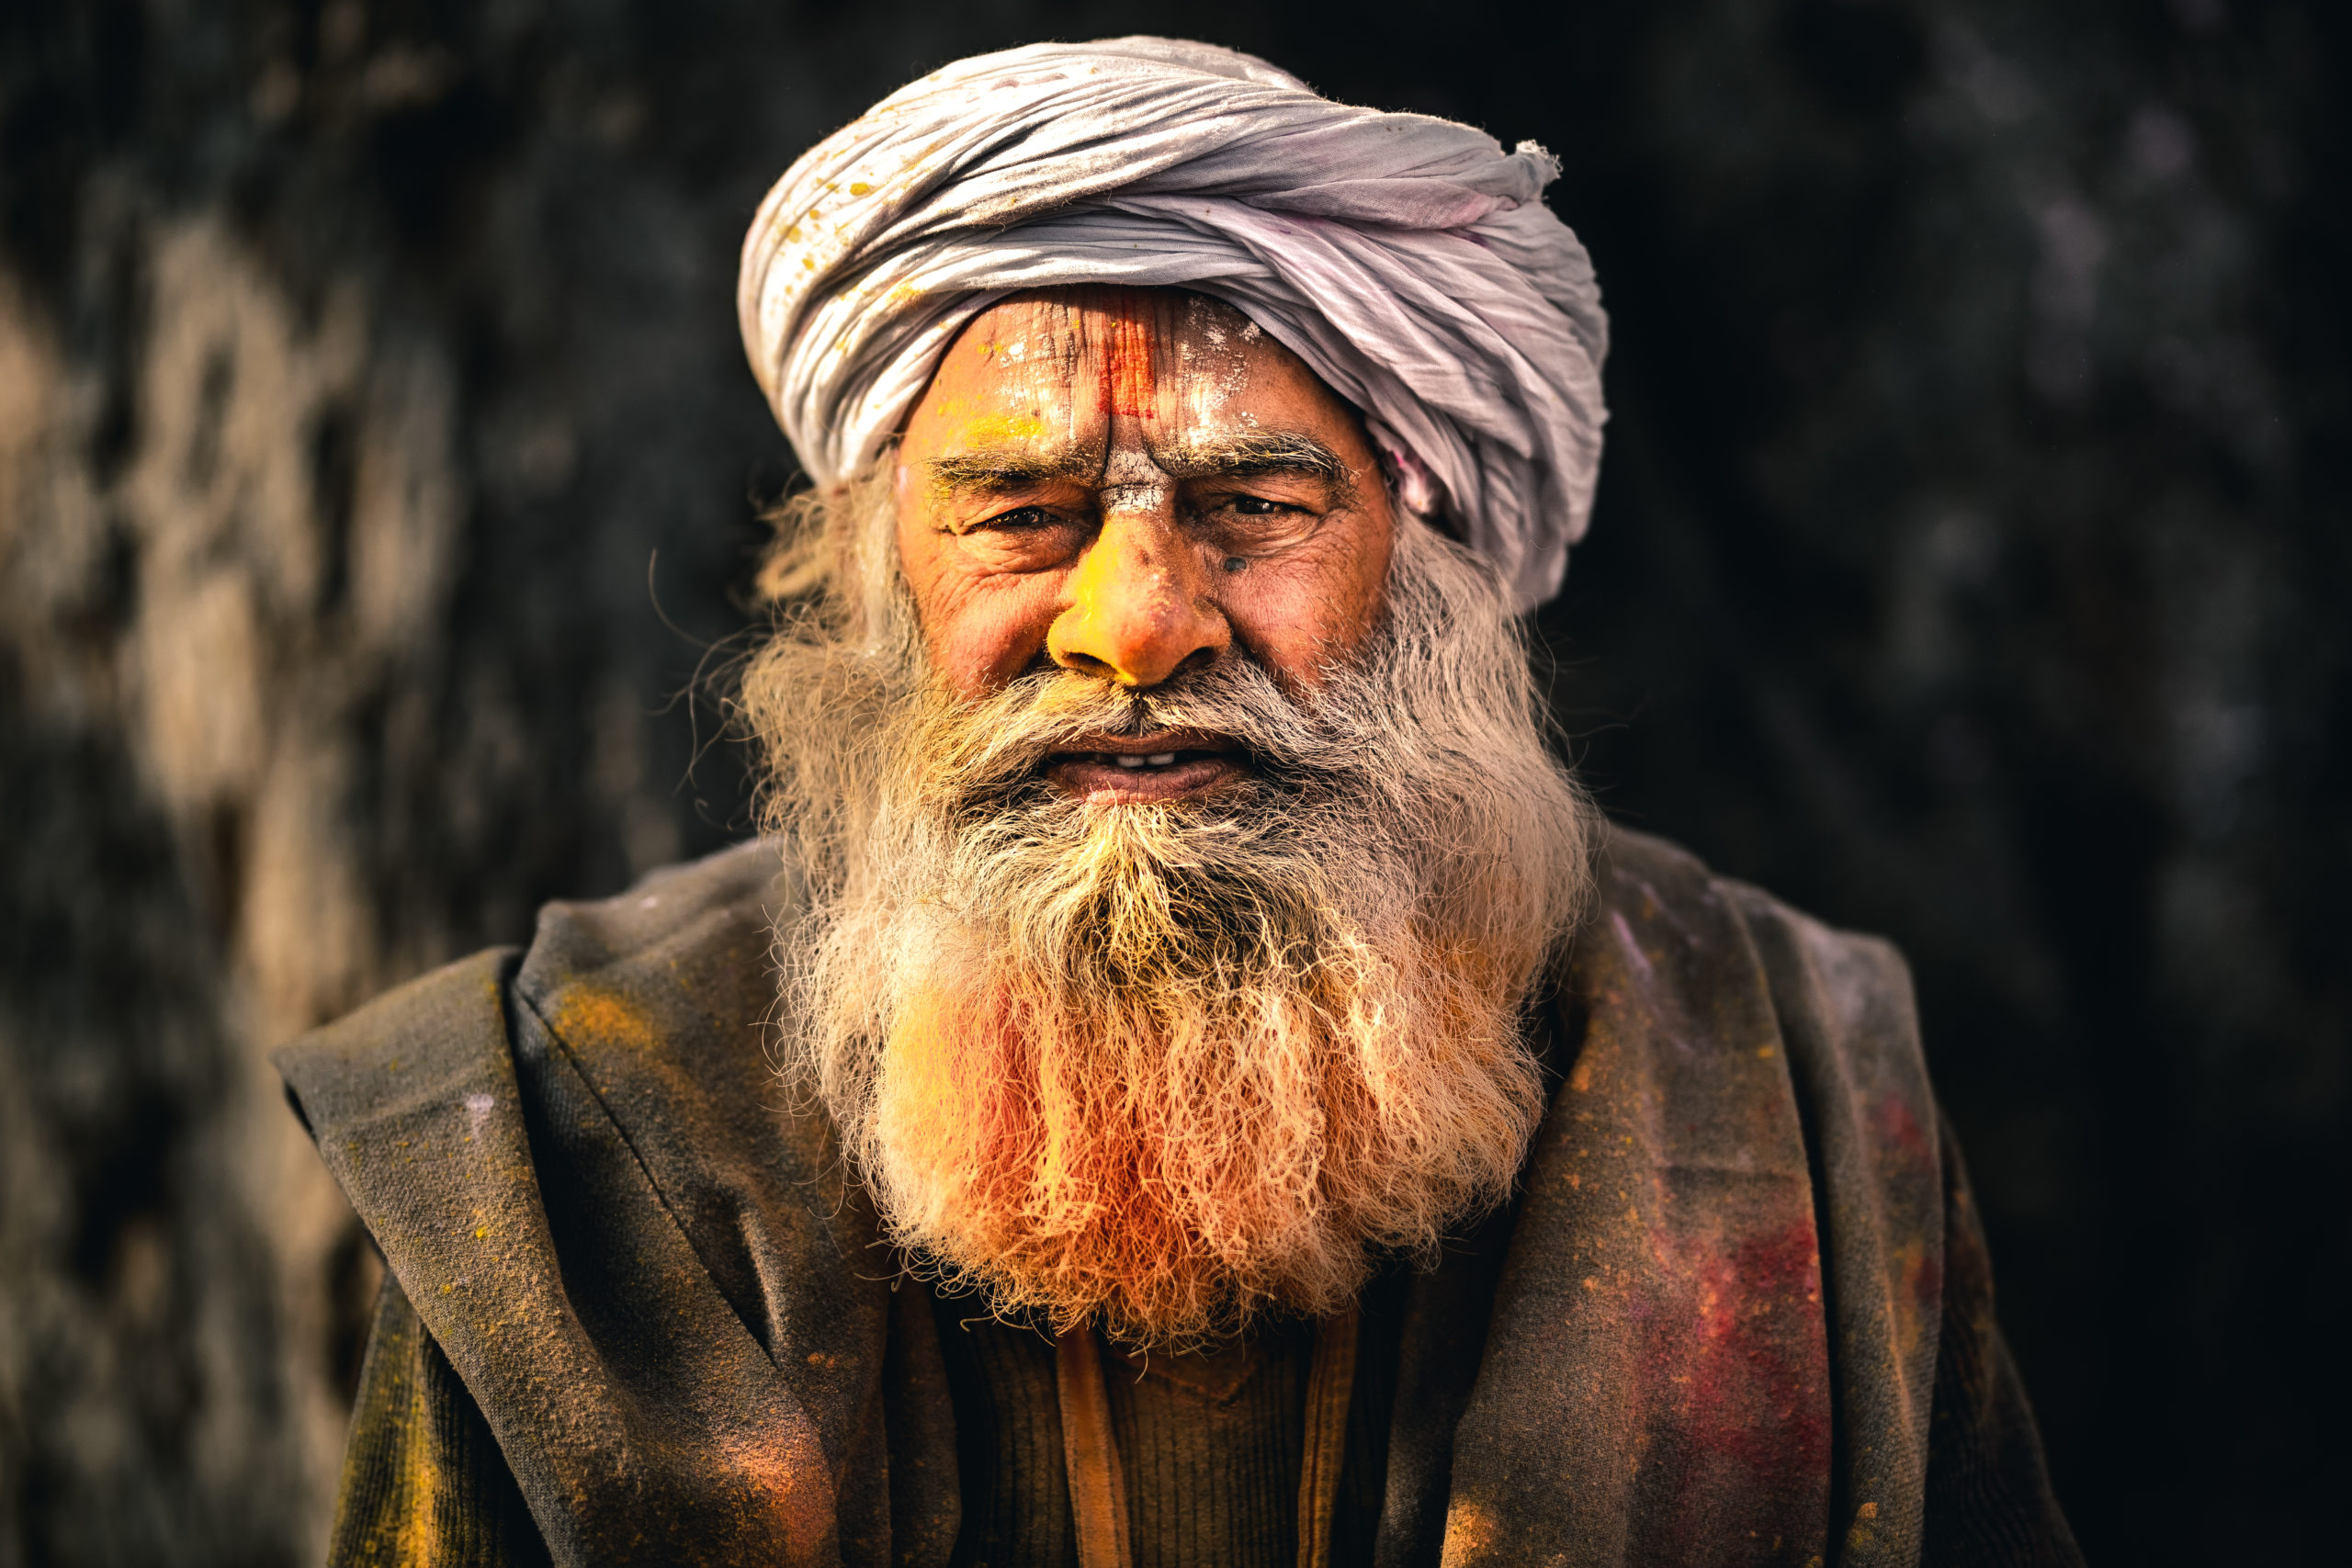 Street Portrait Photography of an elderly man in Mathura, India during the Holi Festival. He has color on his face and in his beard